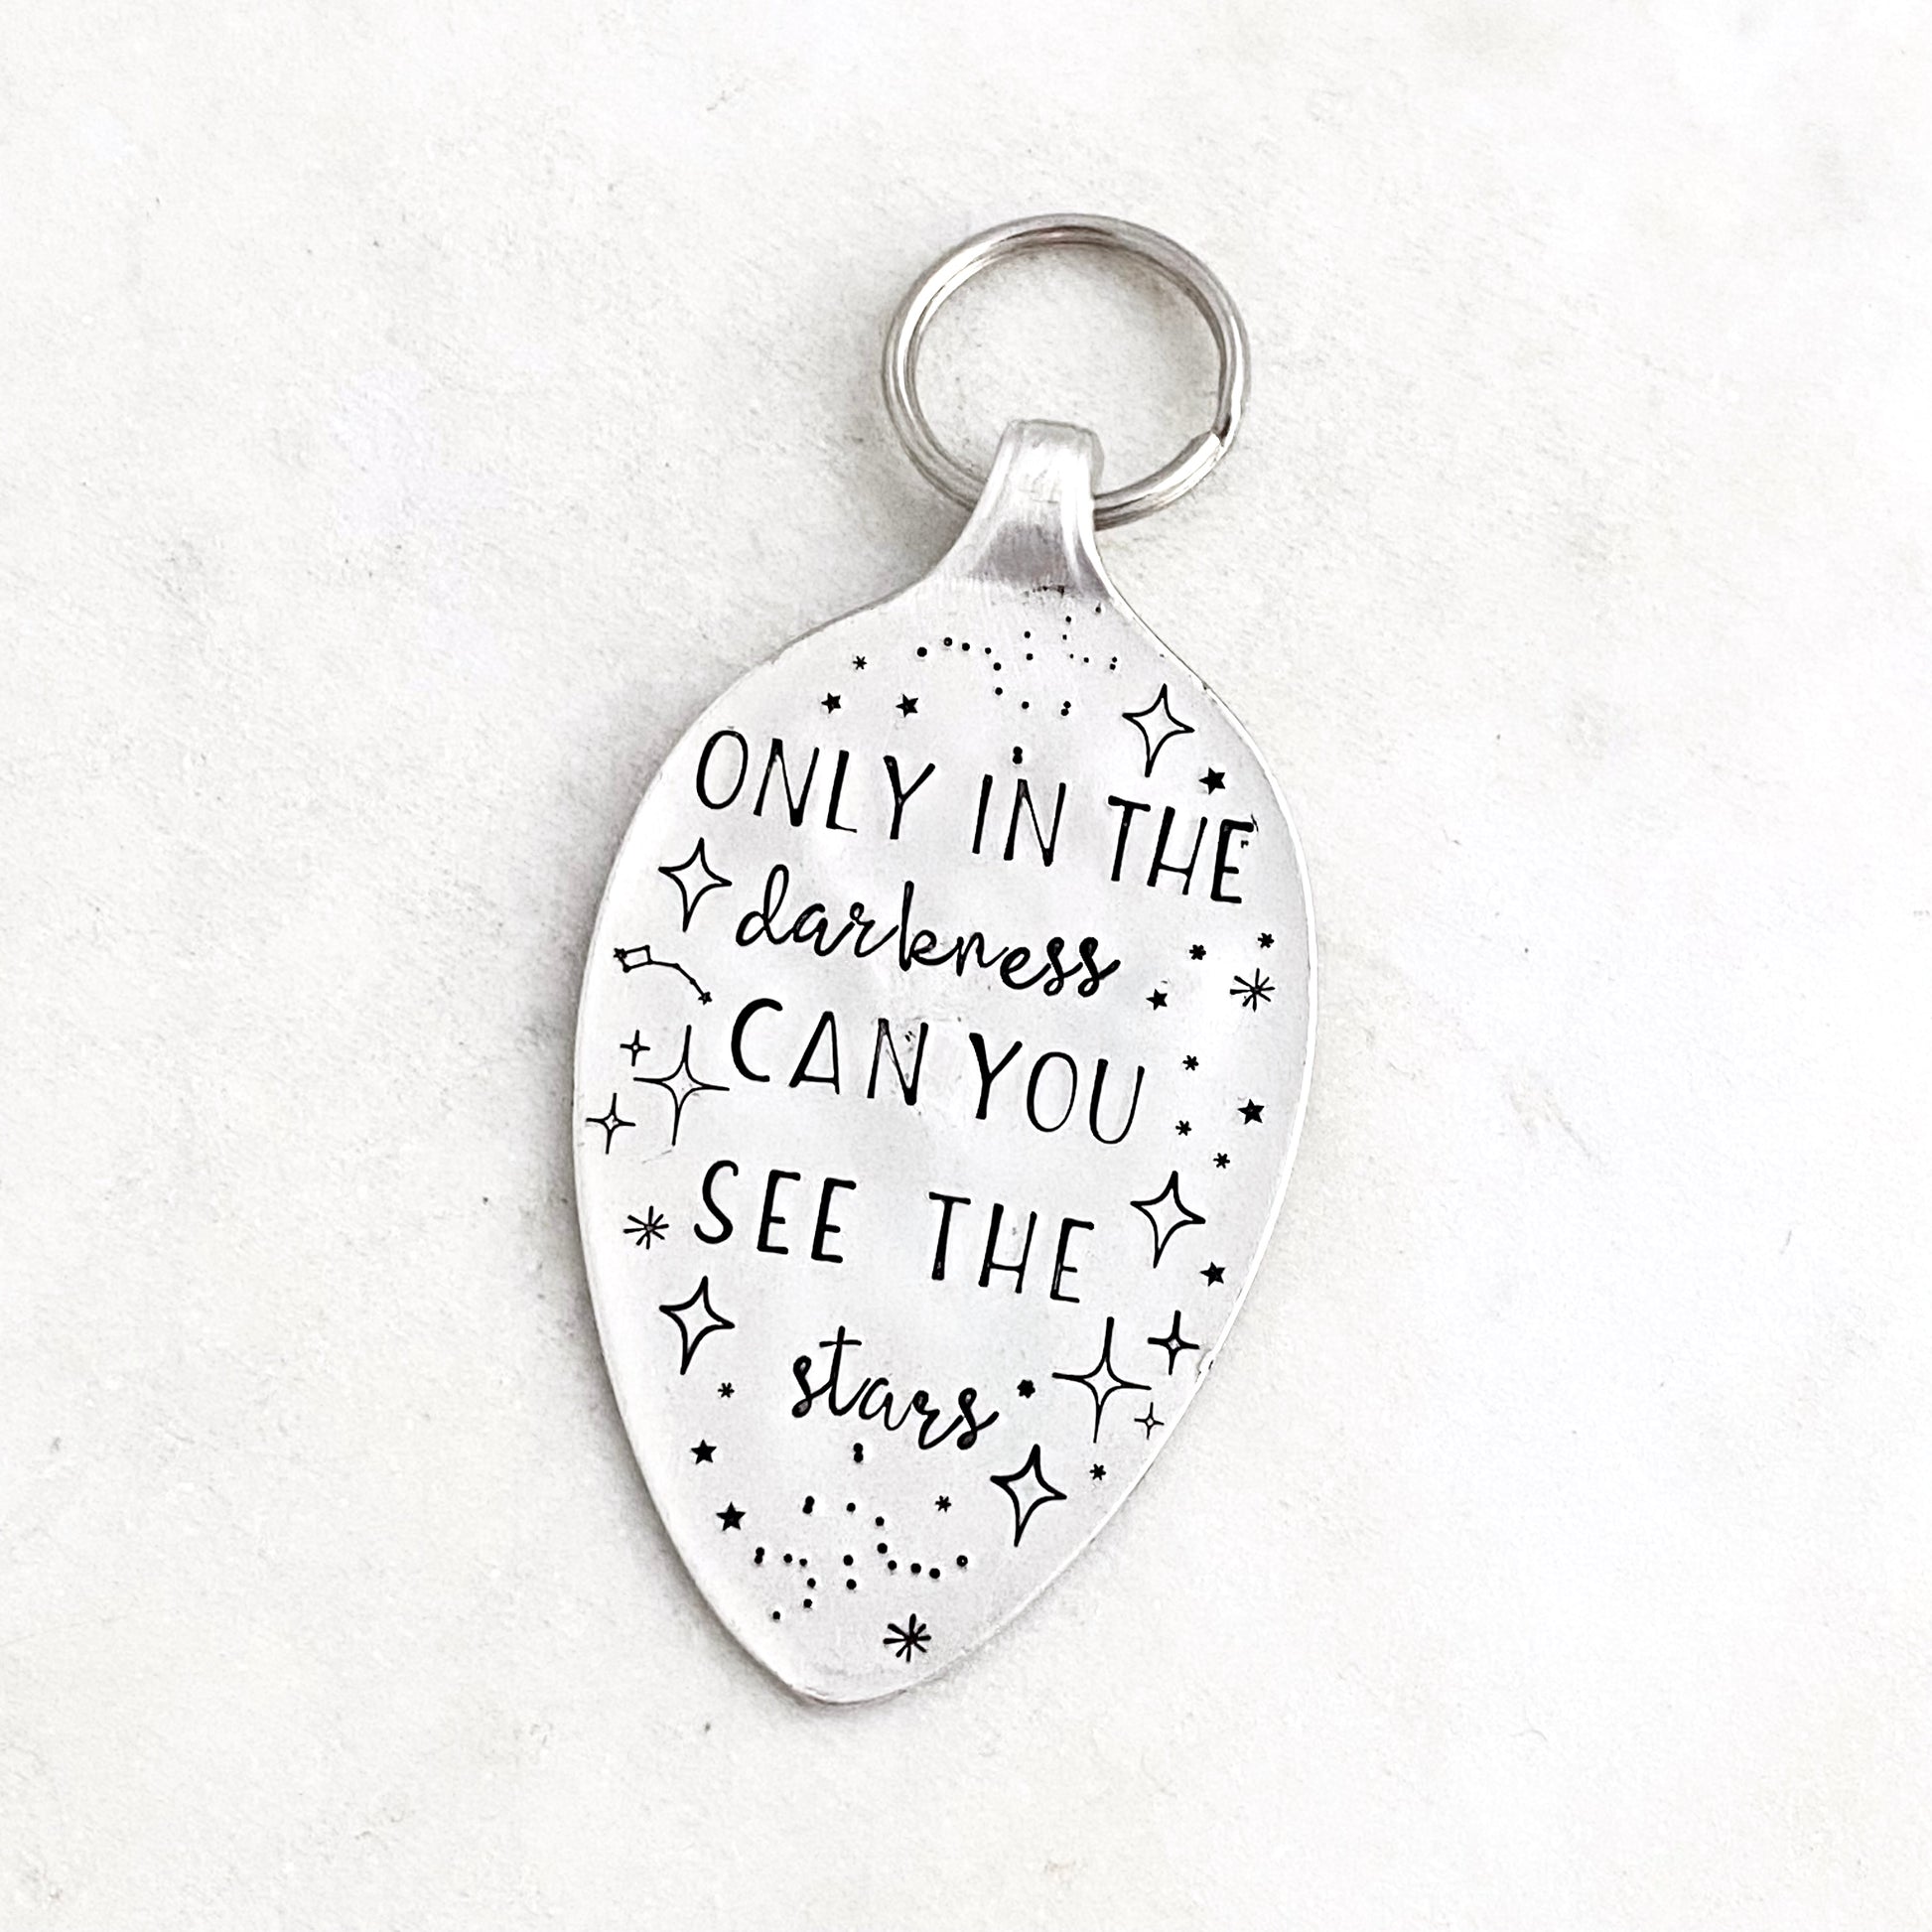 Only in the Darkness Can You See the Stars, Hand Stamped Vintage Spoon Keychain Keychains callistafaye   